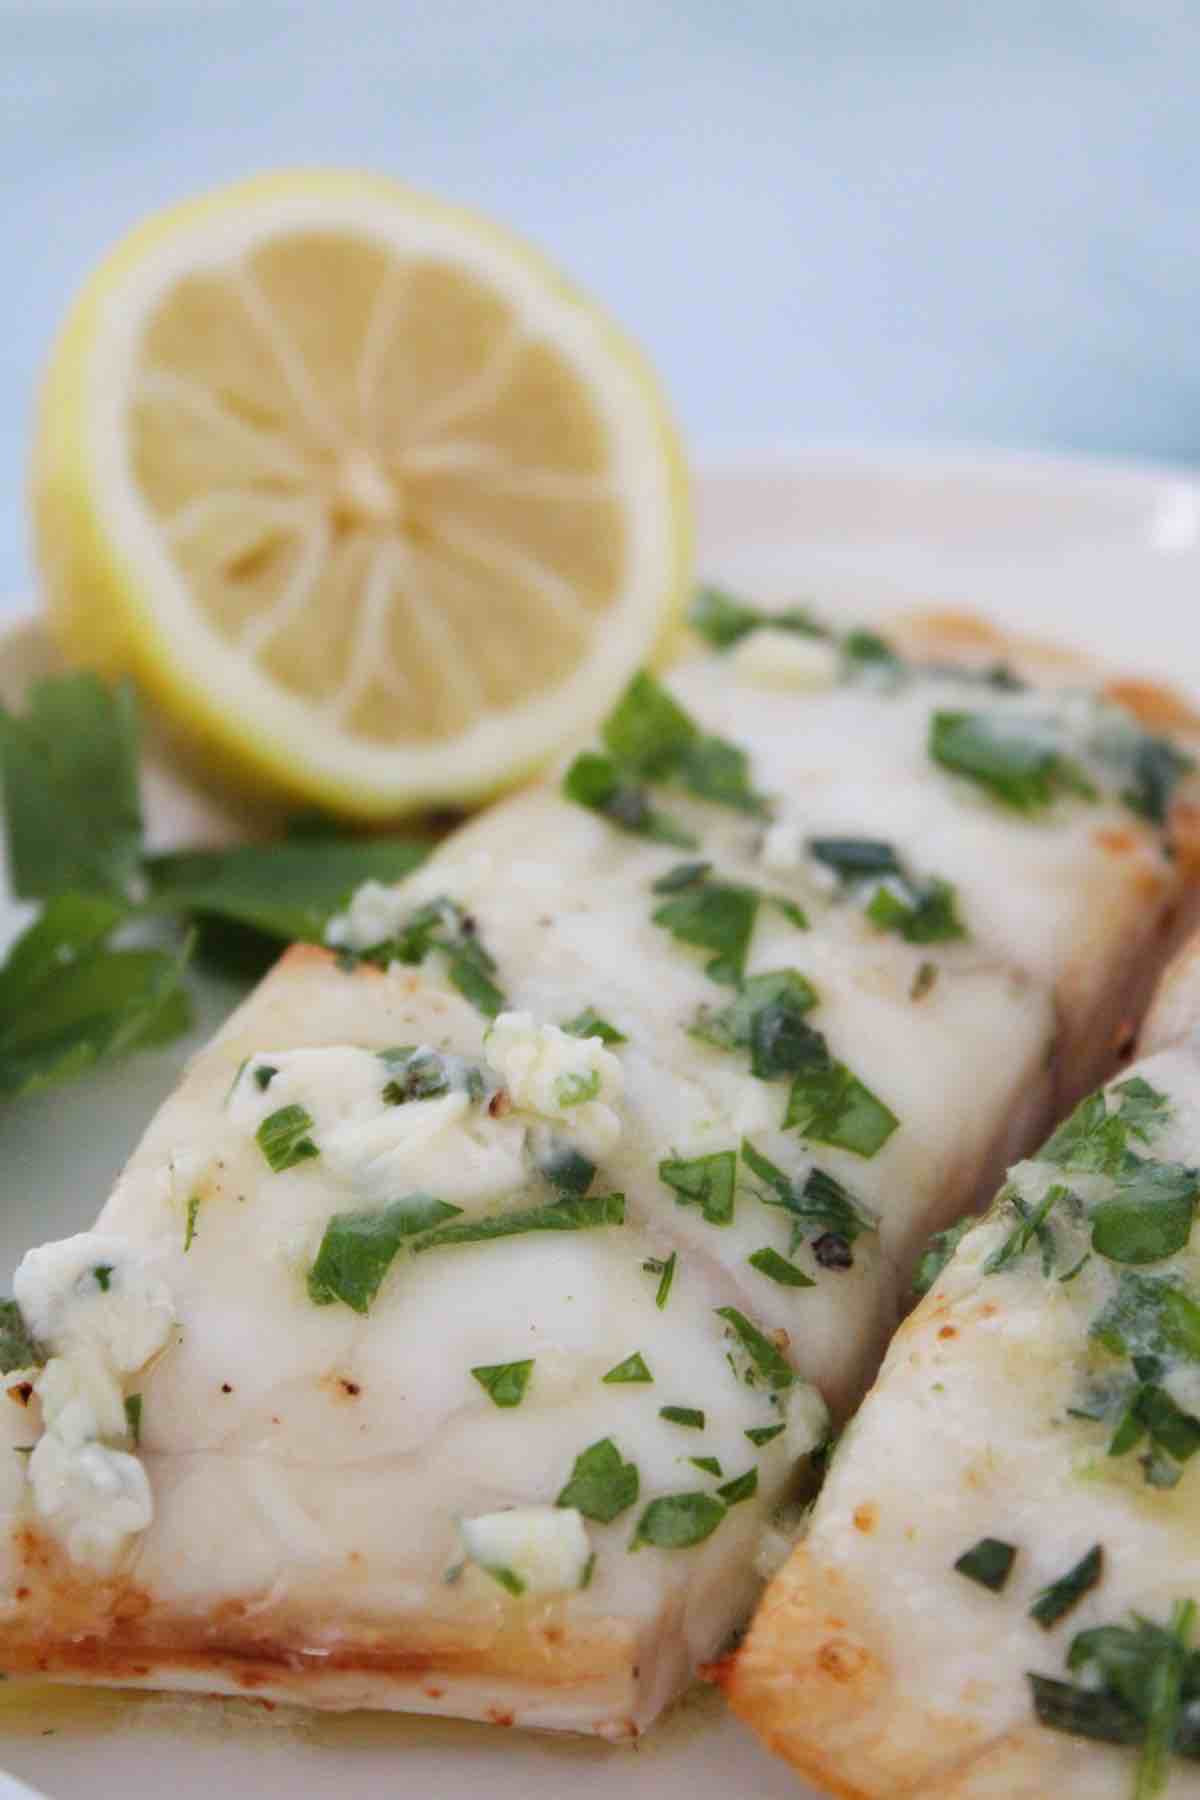 These air fryer red snapper fillets are ready in less than 20 minutes. They're low-carb and keto friendly for a healthy weeknight meal.